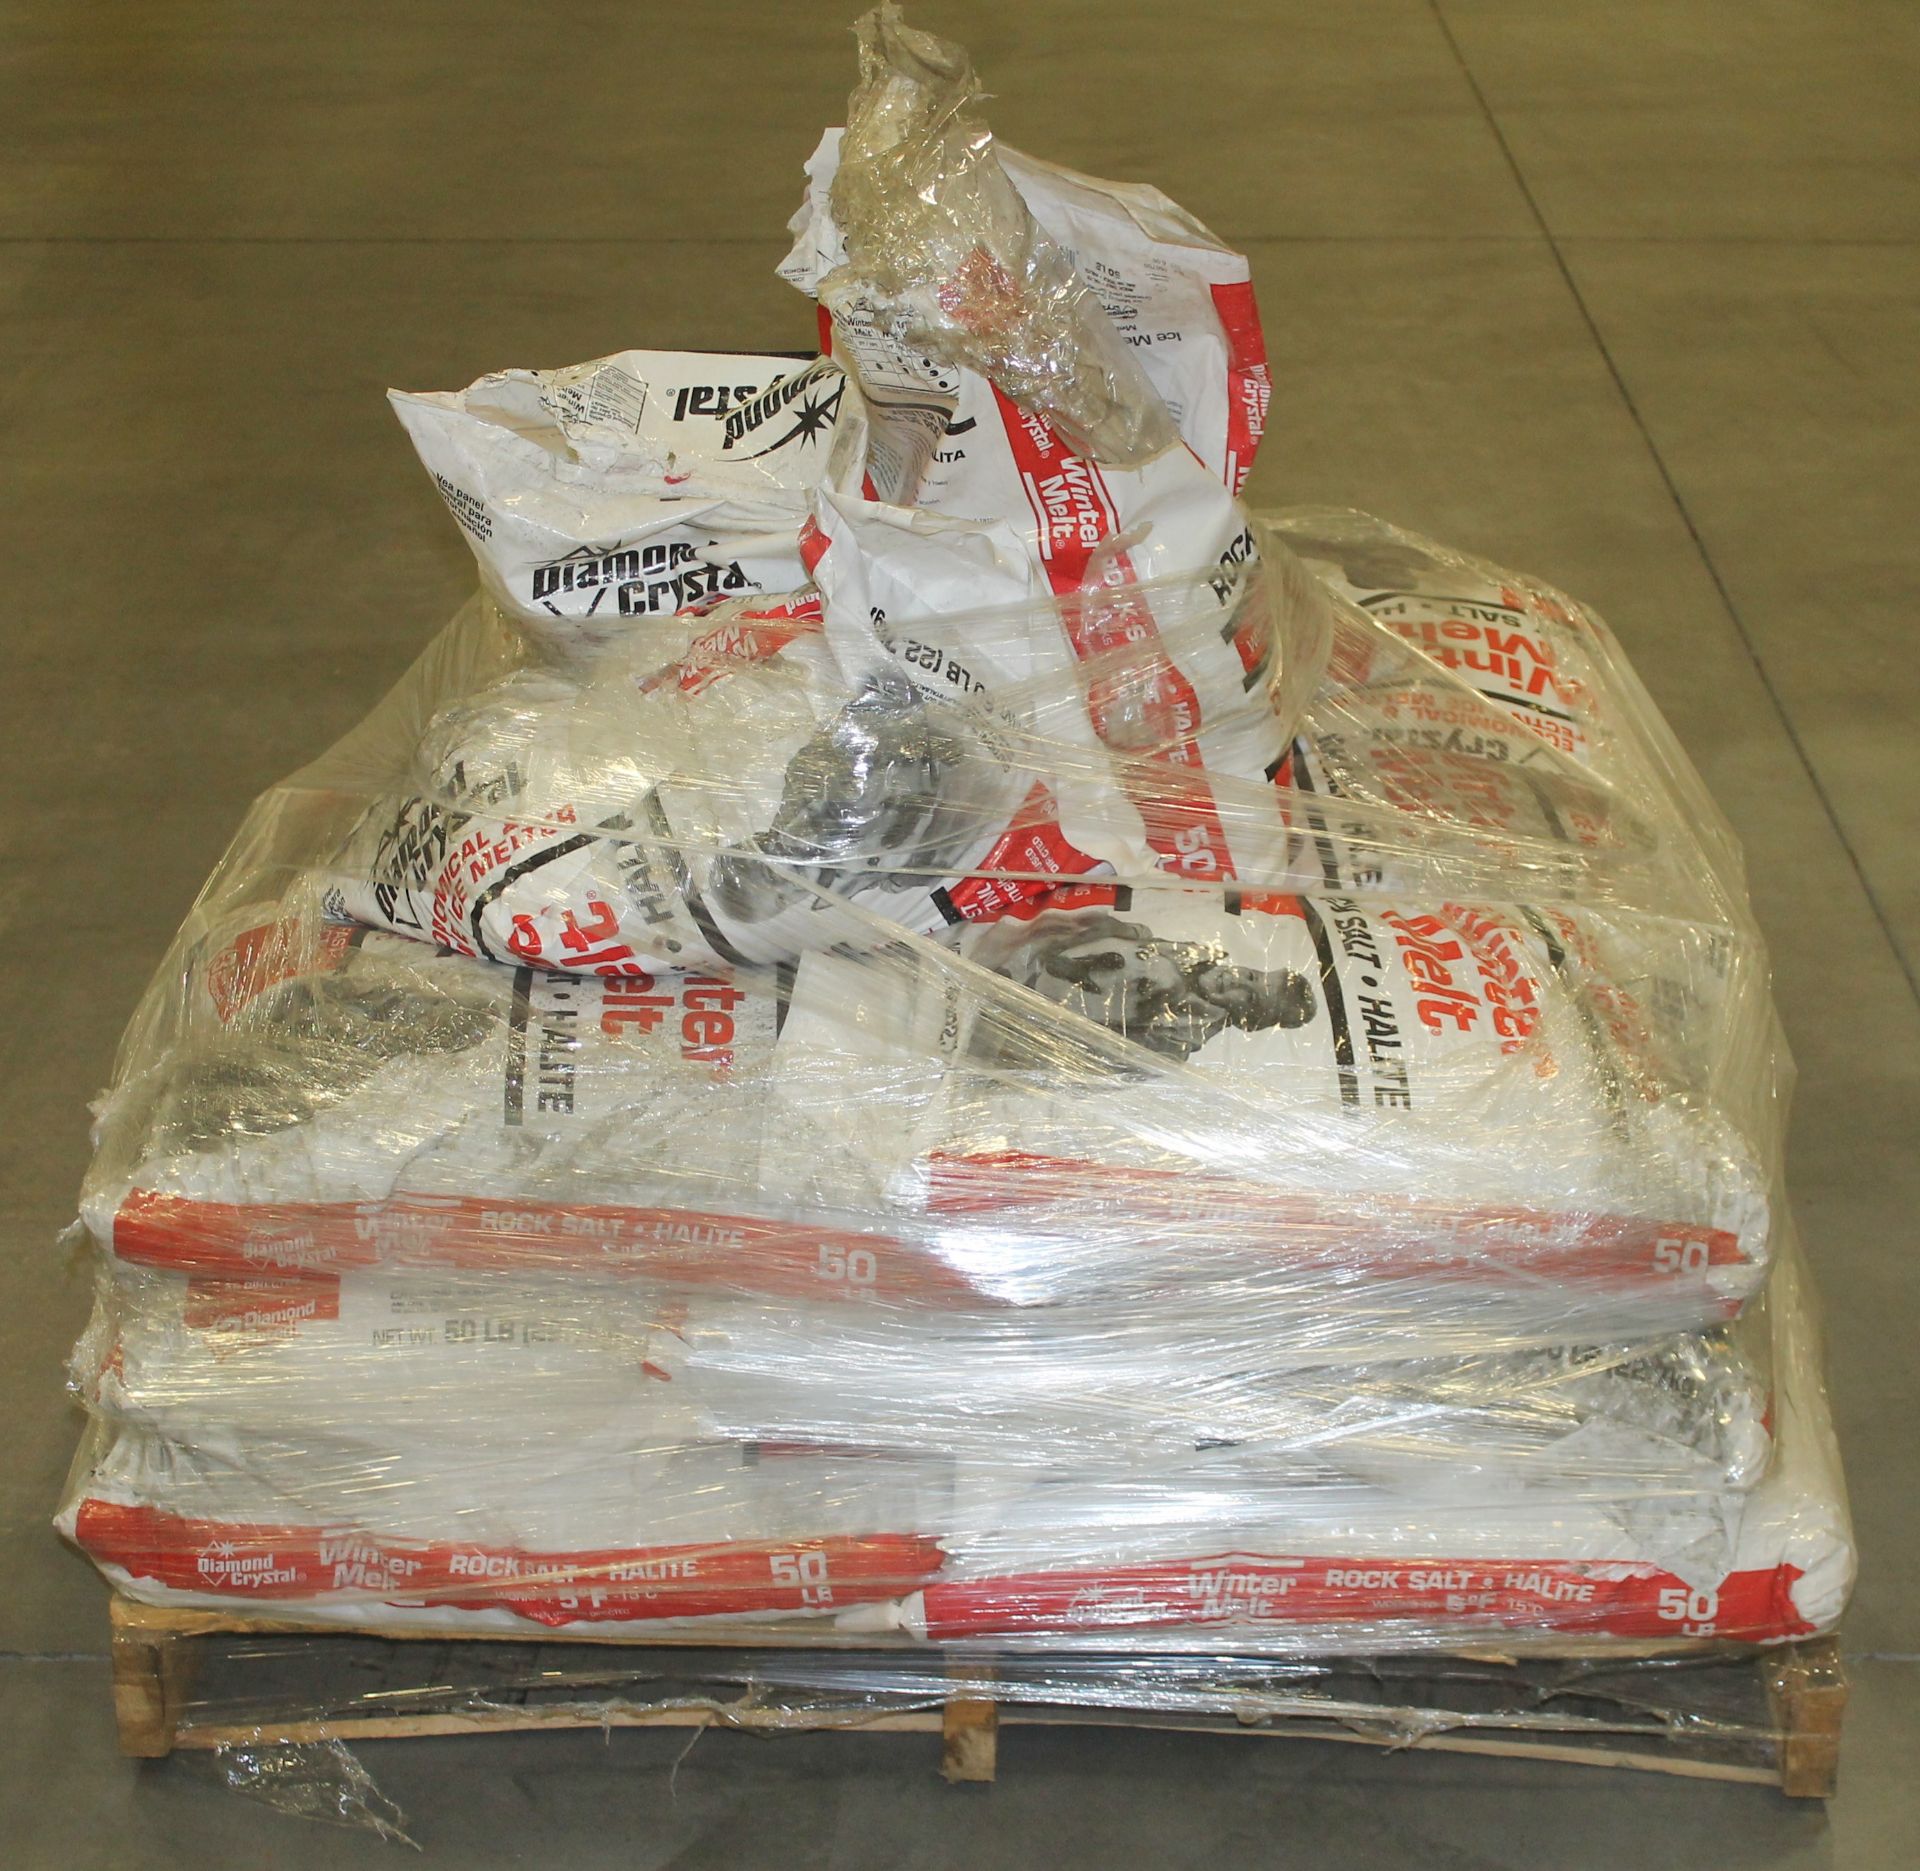 PALLET OF DIAMOND CRYSTAL ECONOMICAL & EFFECTIVE ICE MELTER,